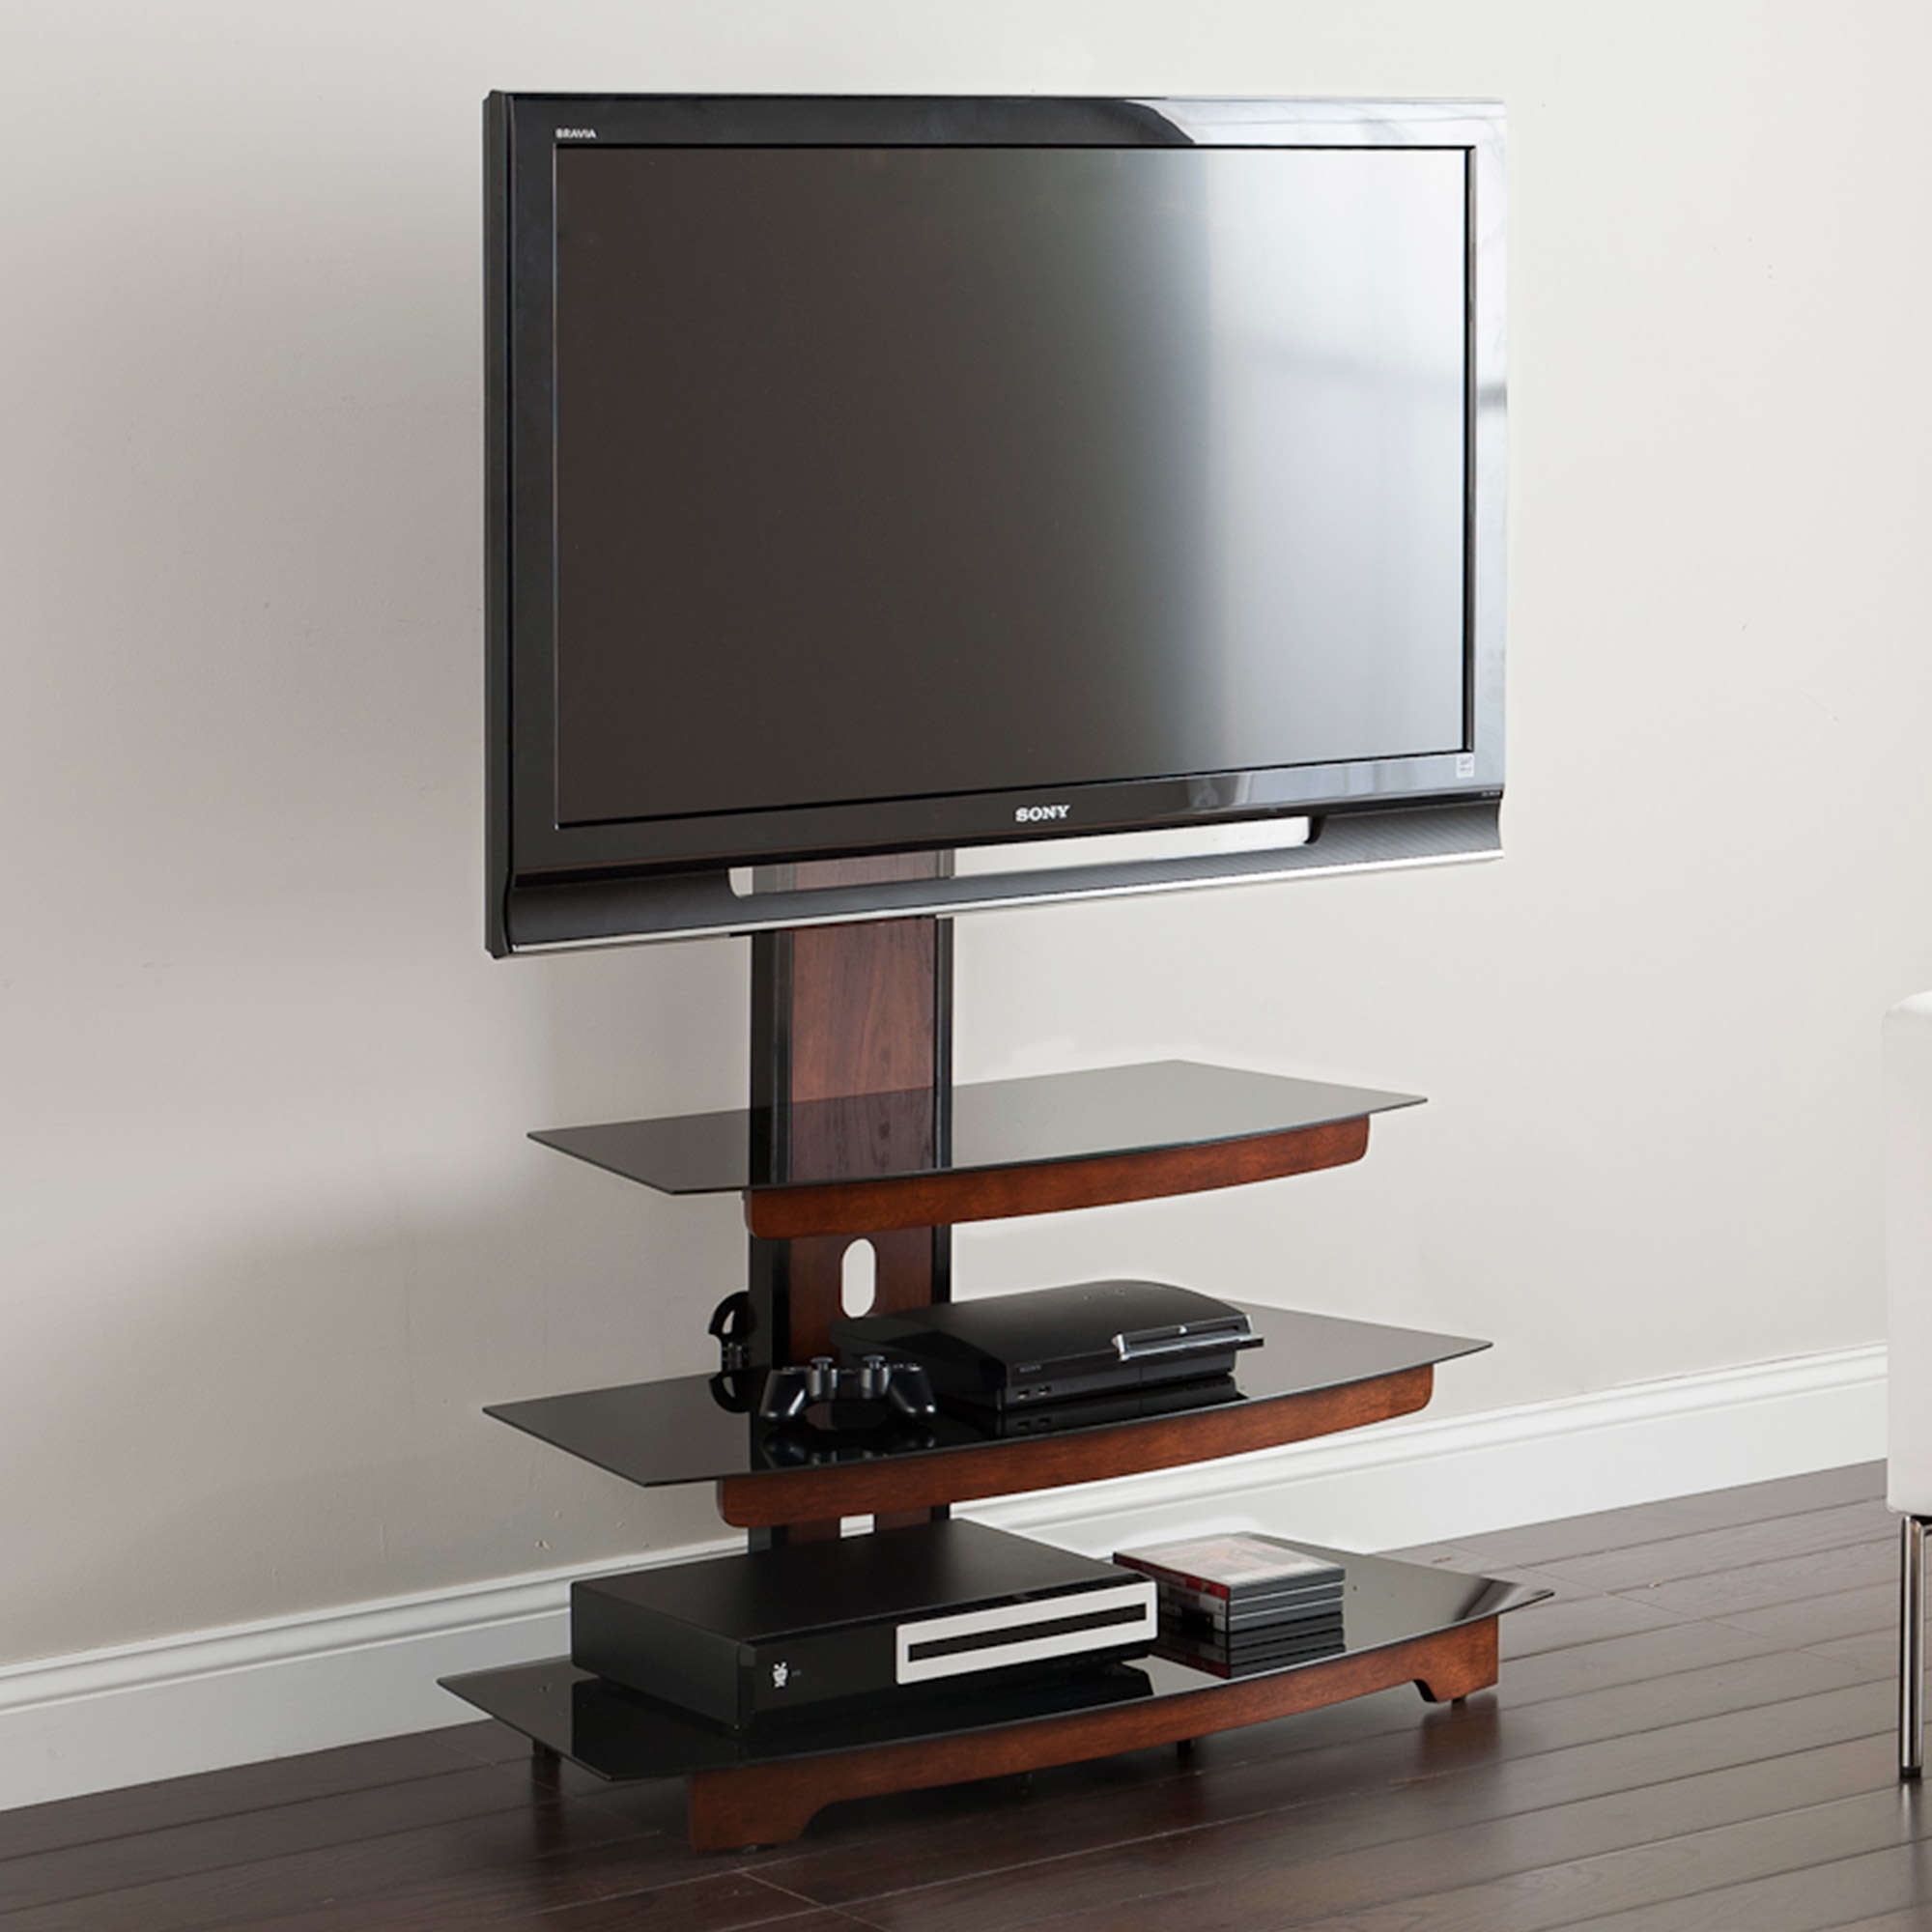 Whalen 3 Tier Television Stand For Tvs Up To 50", Perfect For Flat Screens,  Black Metal With Wood Trim Accent – Walmart In Tier Stands For Tvs (View 4 of 15)